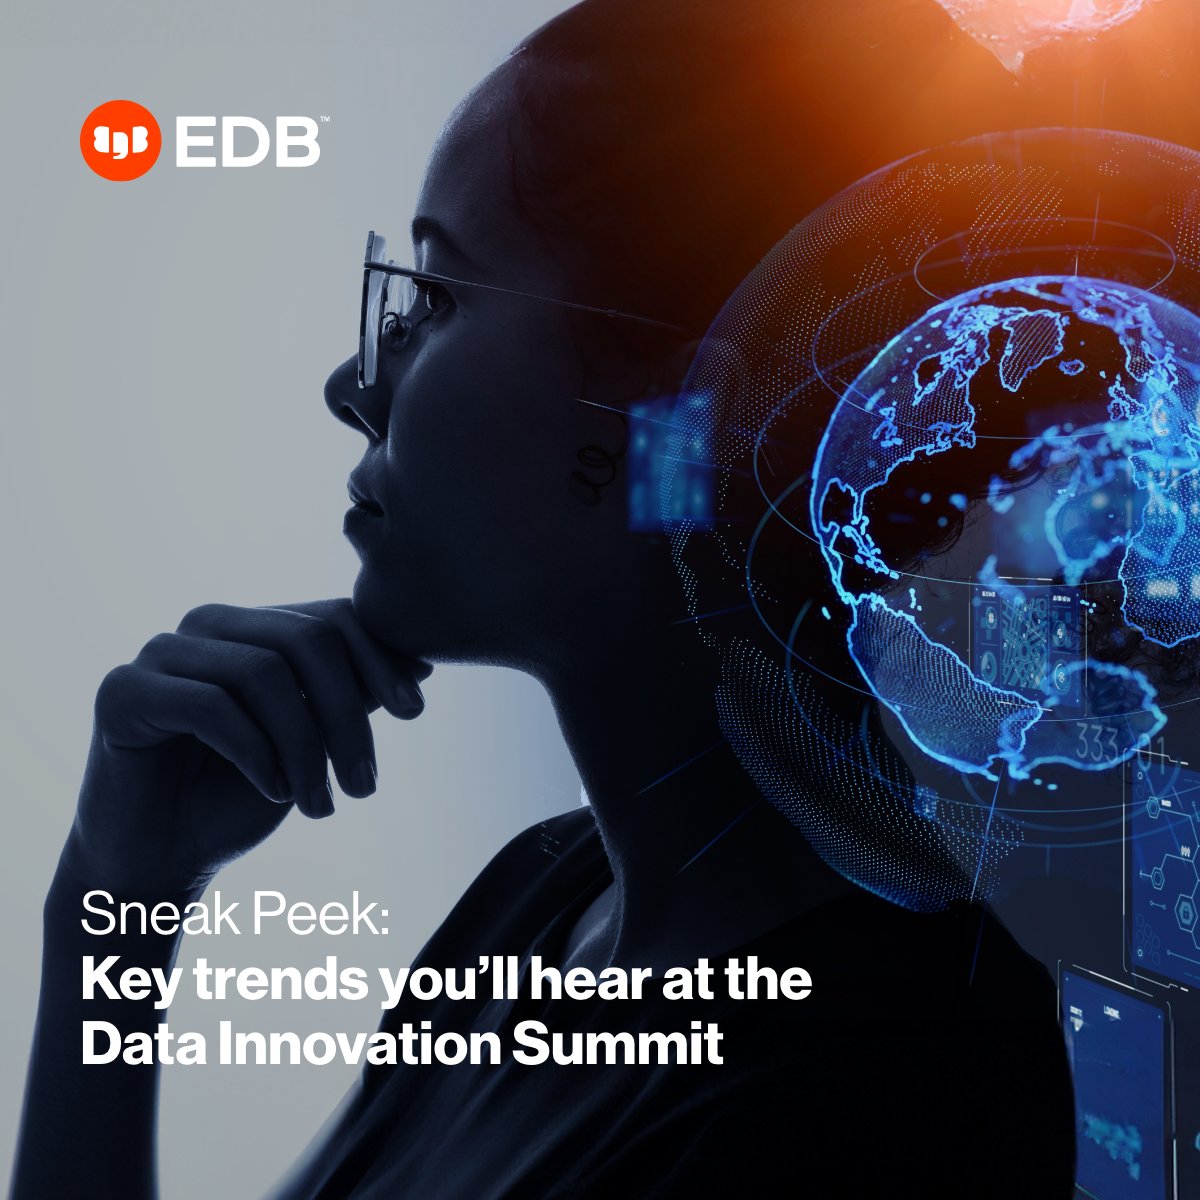 Get a sneak peek at what we have in store for @DISummit2030 with the latest trends IT leaders can't miss from AI to vector. If you're headed to Stockholm, check out our talks and demos live led by EDB Postgres experts. bit.ly/4aOhsjo #artificialintelligence #database